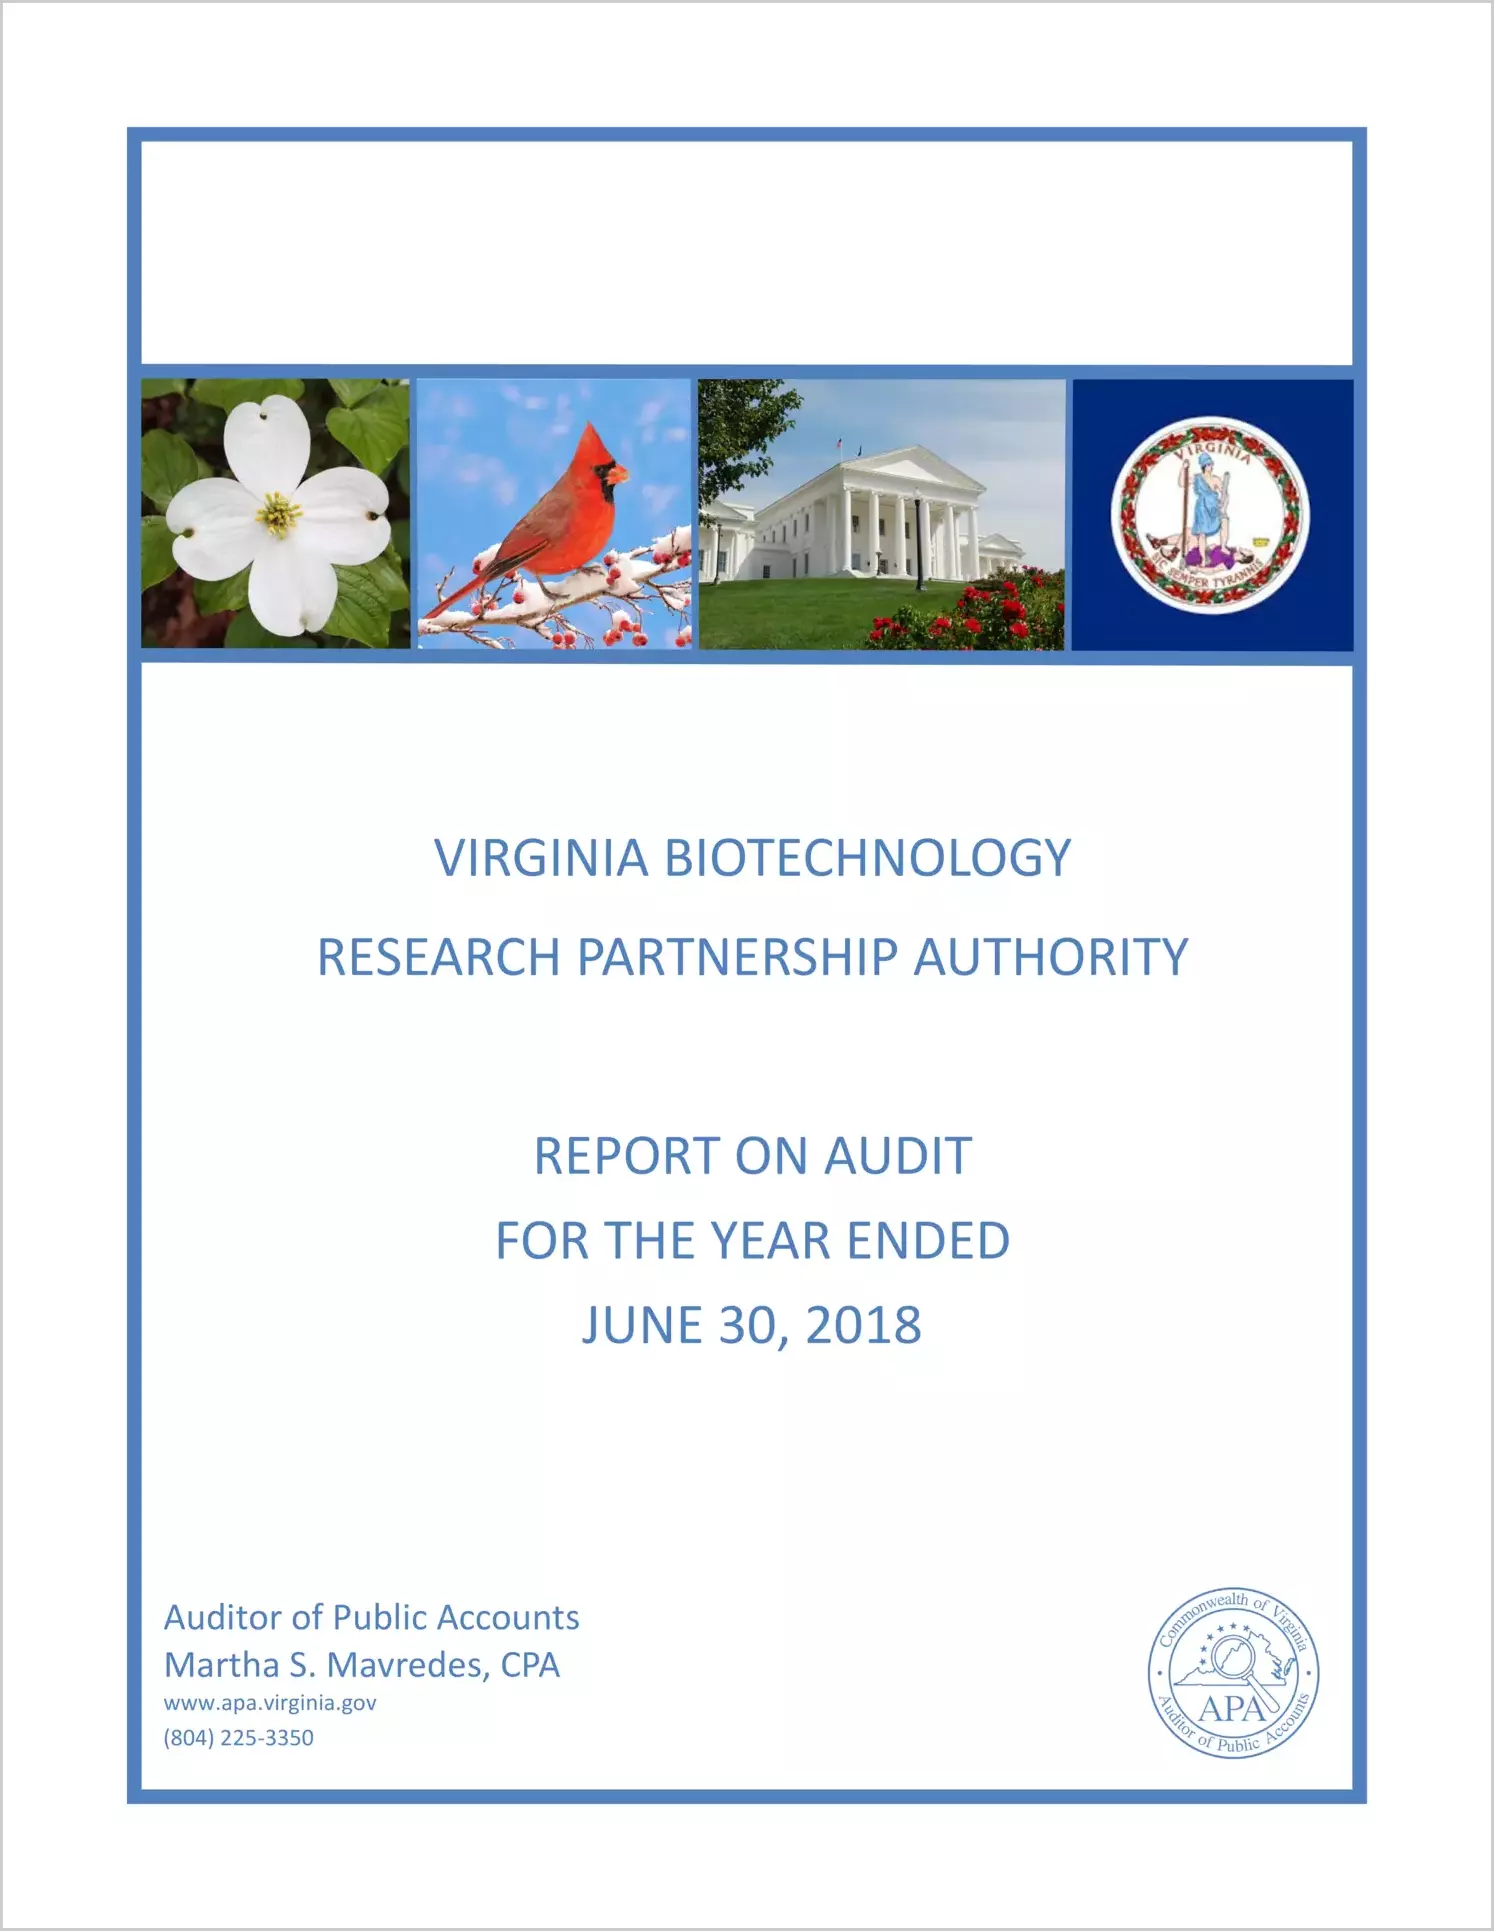 Virginia Biotechnology Research Partnership Authority for the year ended June 30, 2018